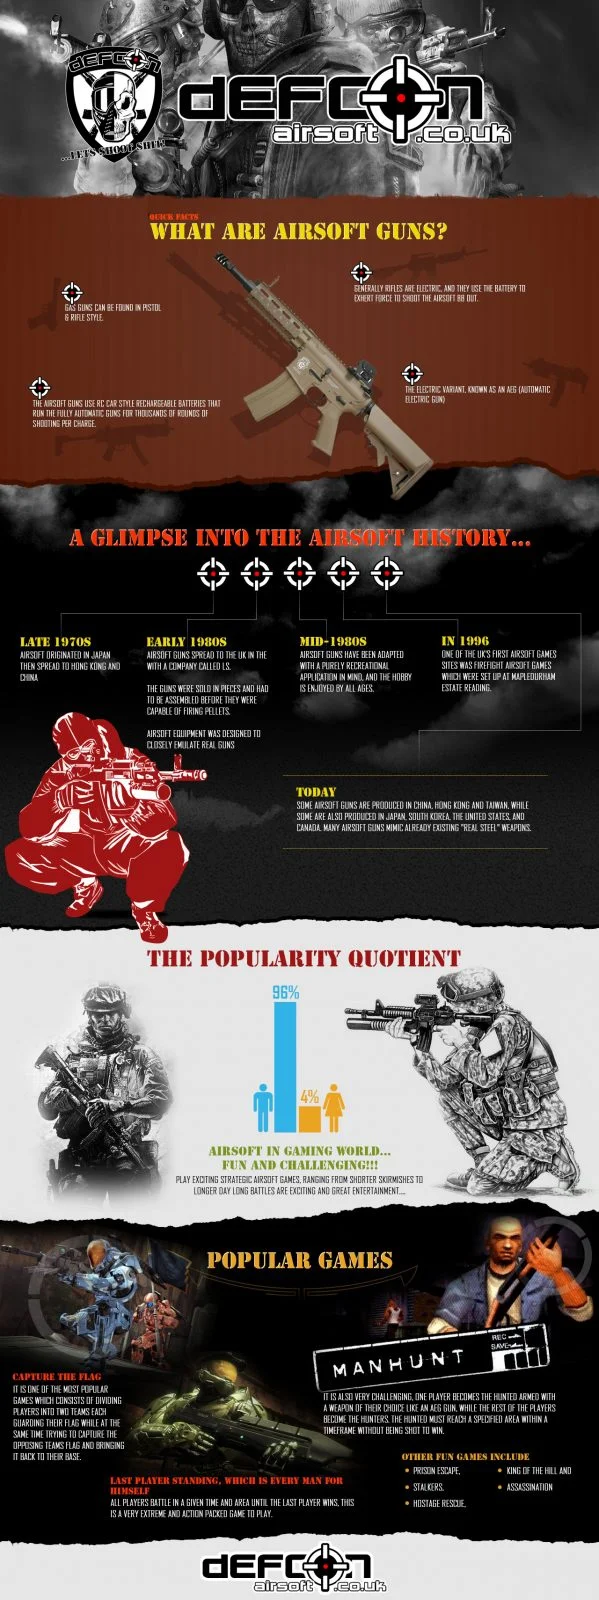 dEFCON Airsoft Infographic